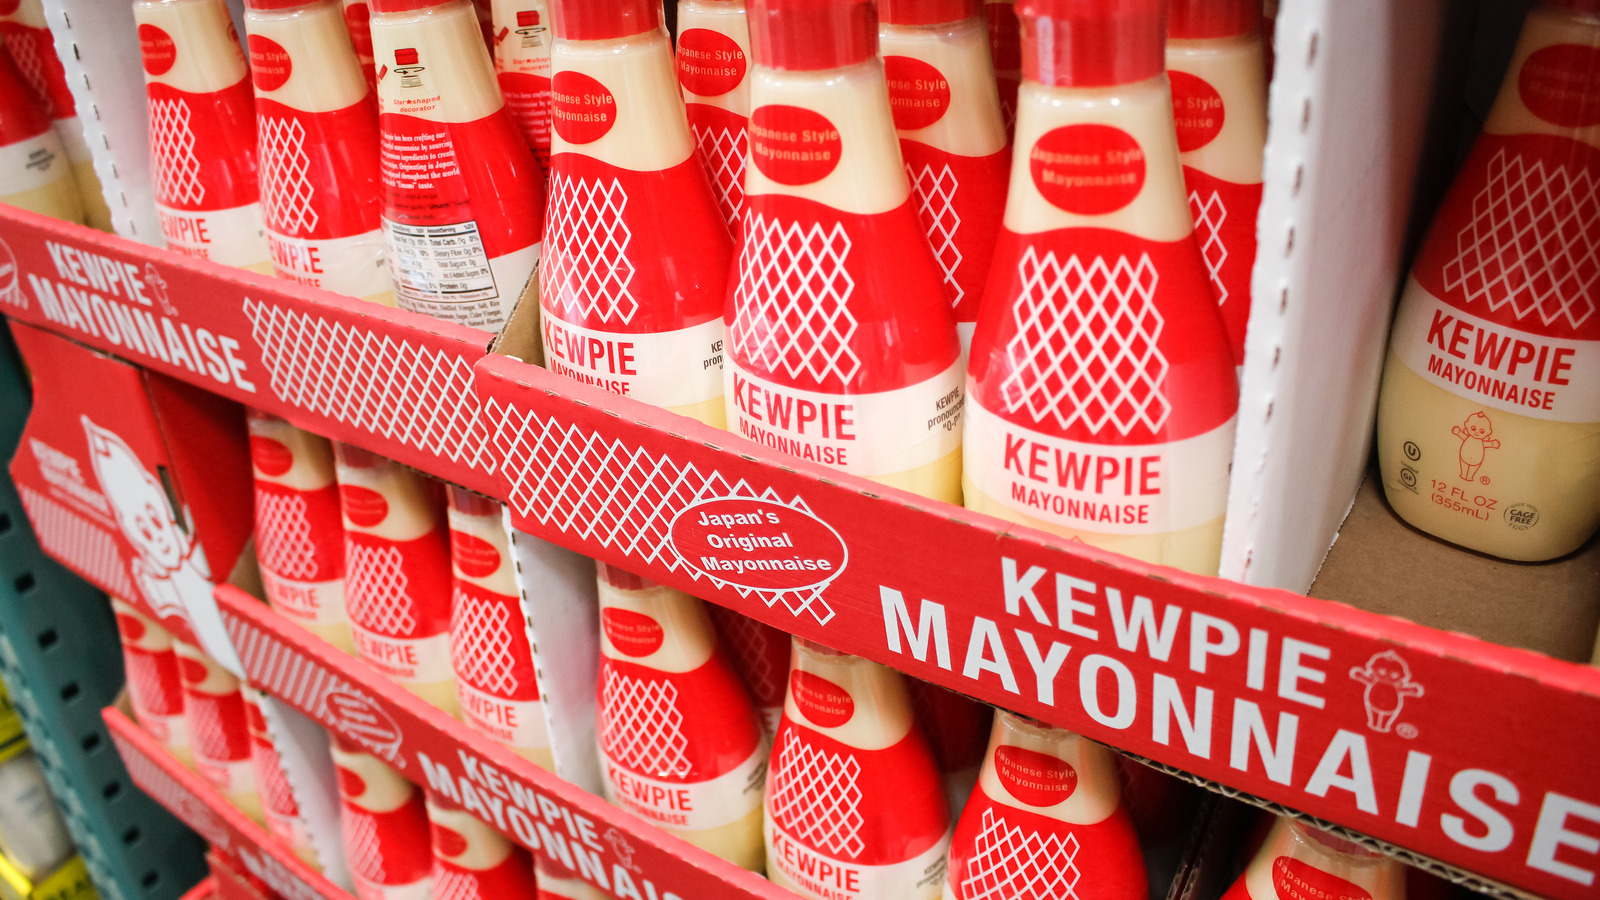 Does Kewpie Mayo Require Refrigeration?